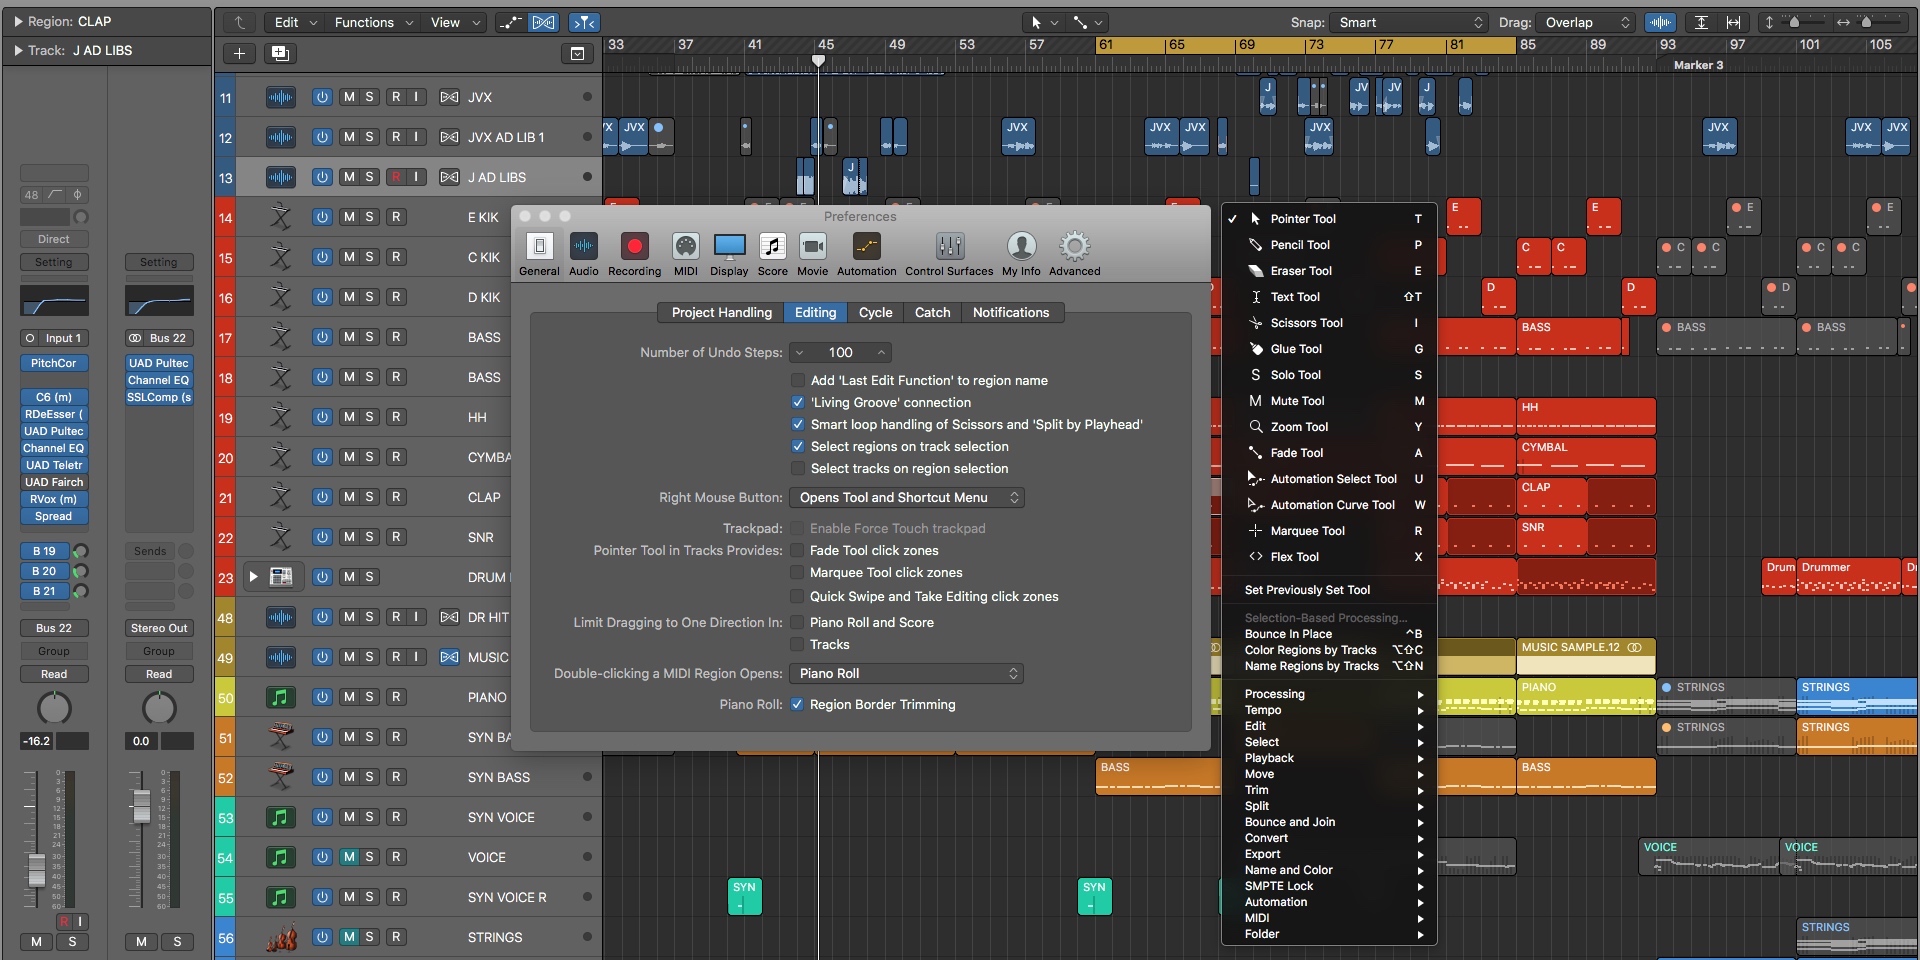 Logic Pro download the last version for windows